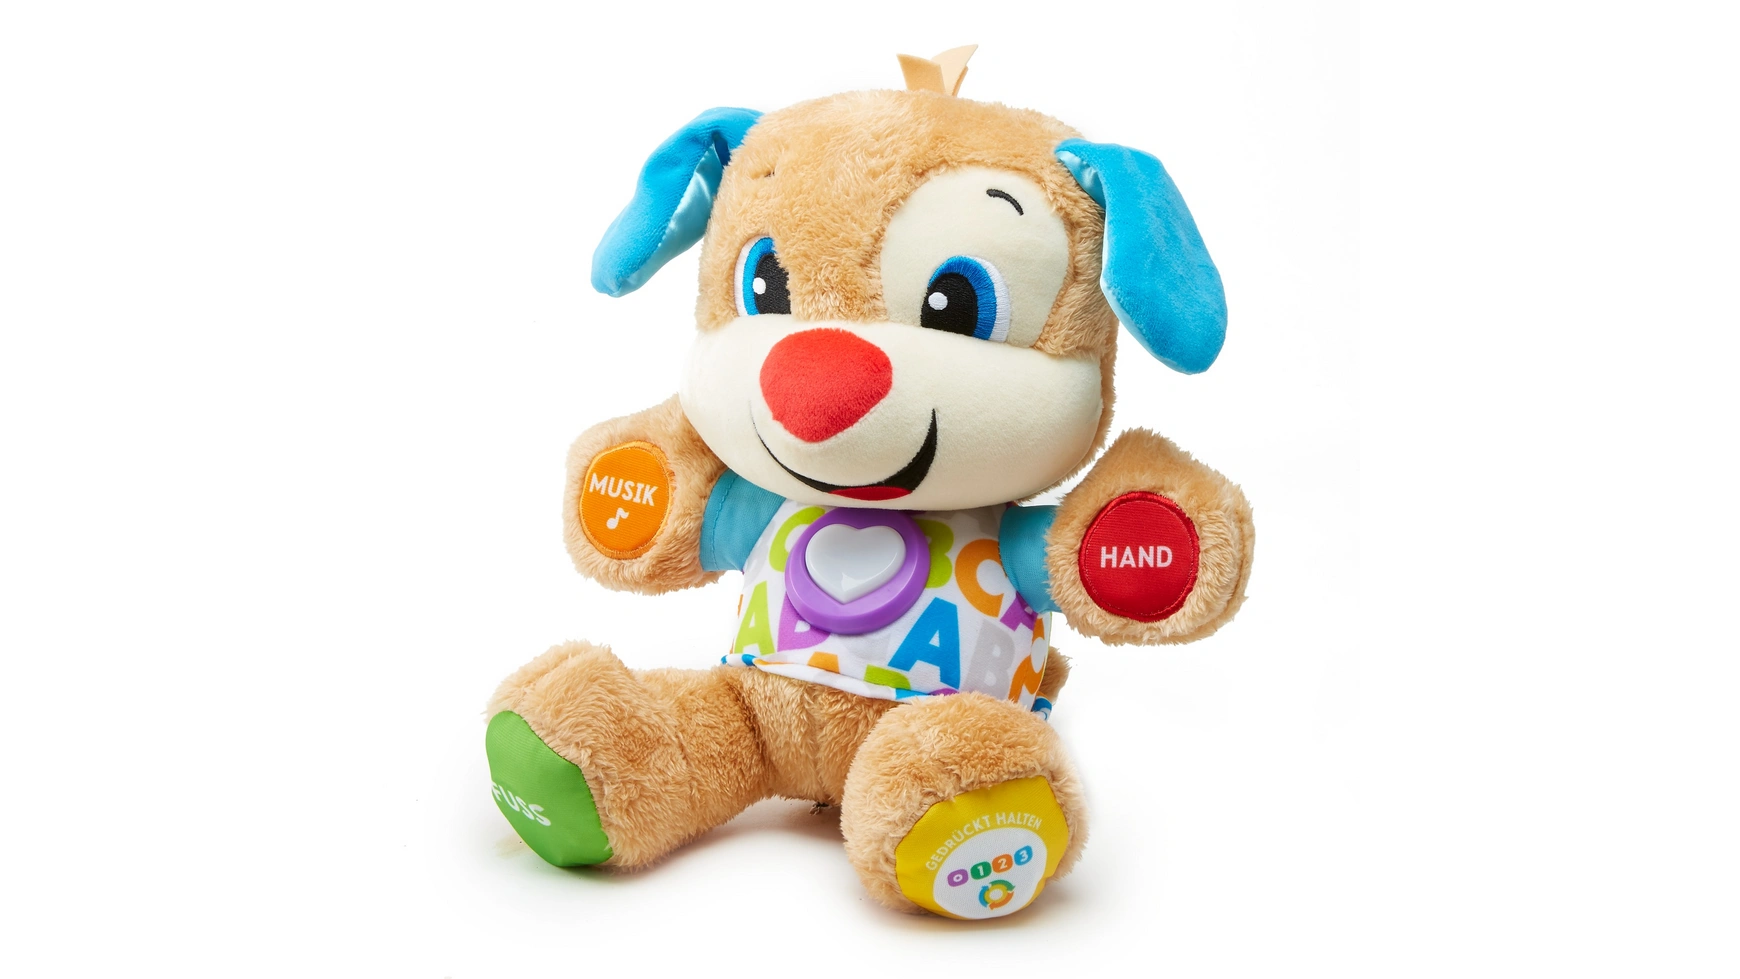 Fisher Price Learning Fun Puppy Детская игрушка с музыкой Мягкая игрушка Развивающая игрушка